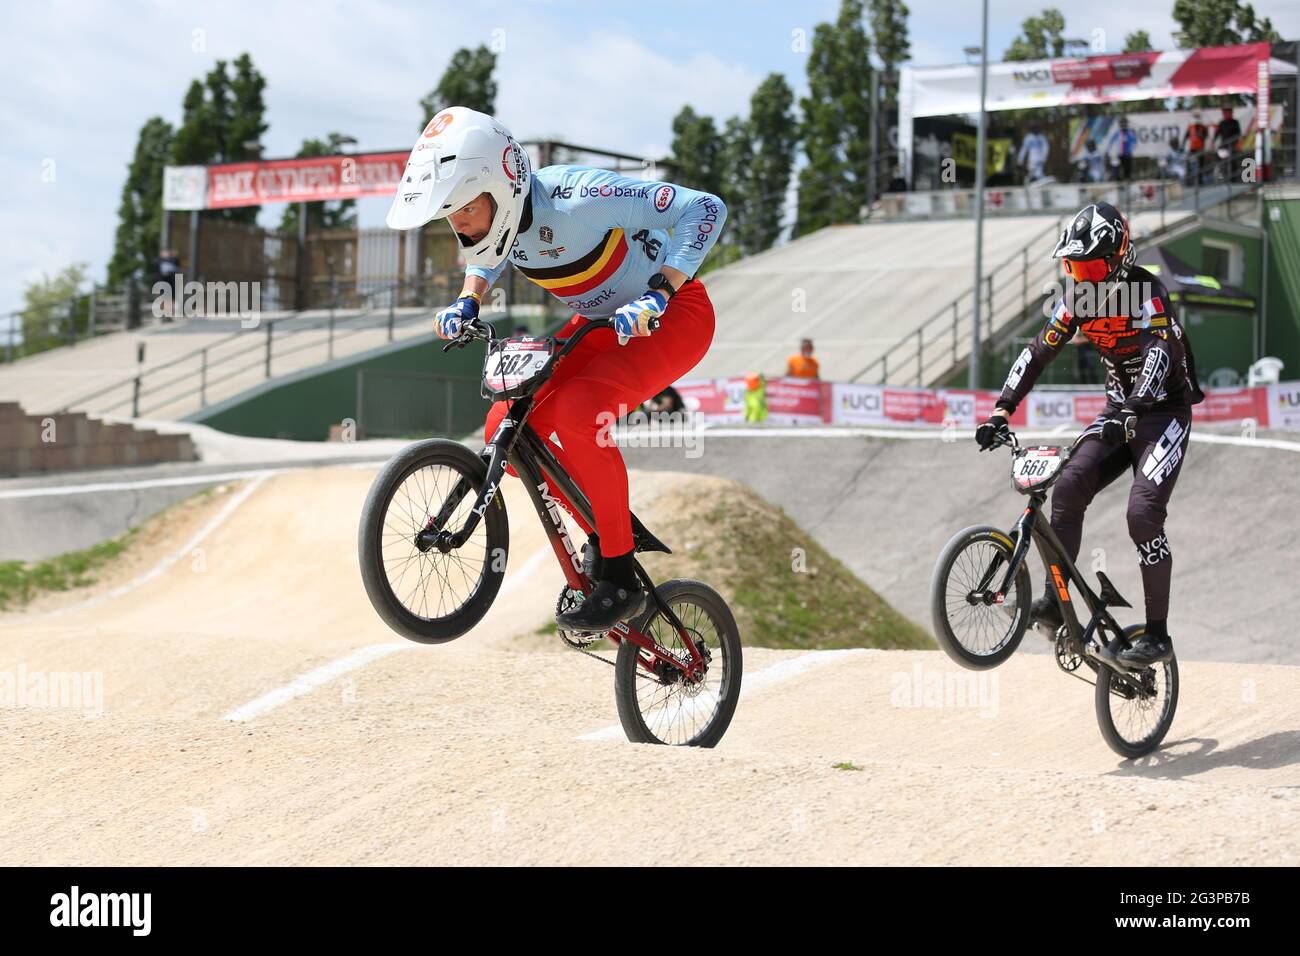 Thibaut STOFFELS of Belgium (602) competes in the UCI BMX Supercross World  Cup Round 1 at the BMX Olympic Arena on May 8th 2021 in Verona, Italy Stock  Photo - Alamy